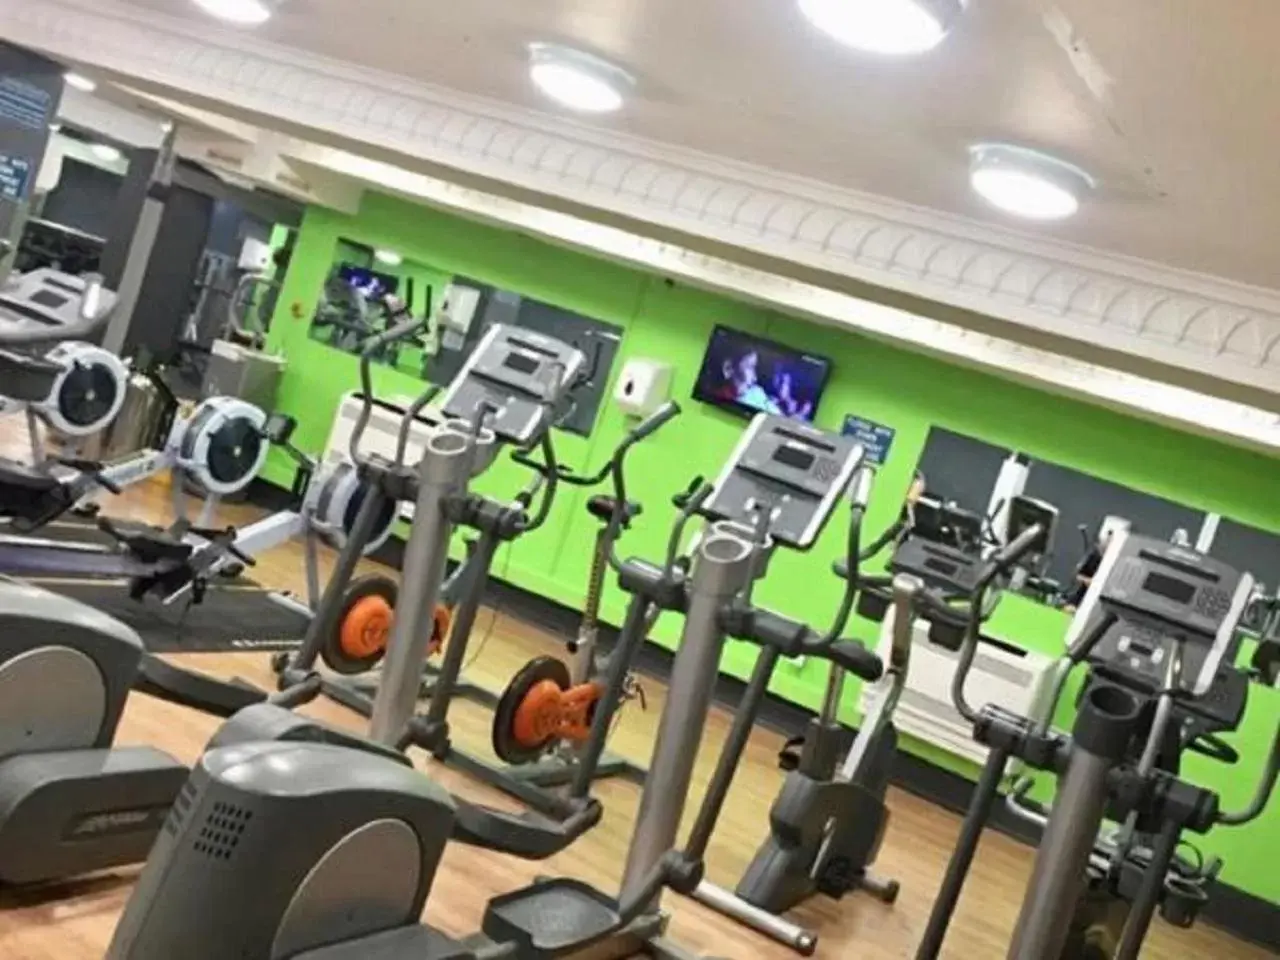 Fitness centre/facilities, Fitness Center/Facilities in Bosworth Hall Hotel & Spa